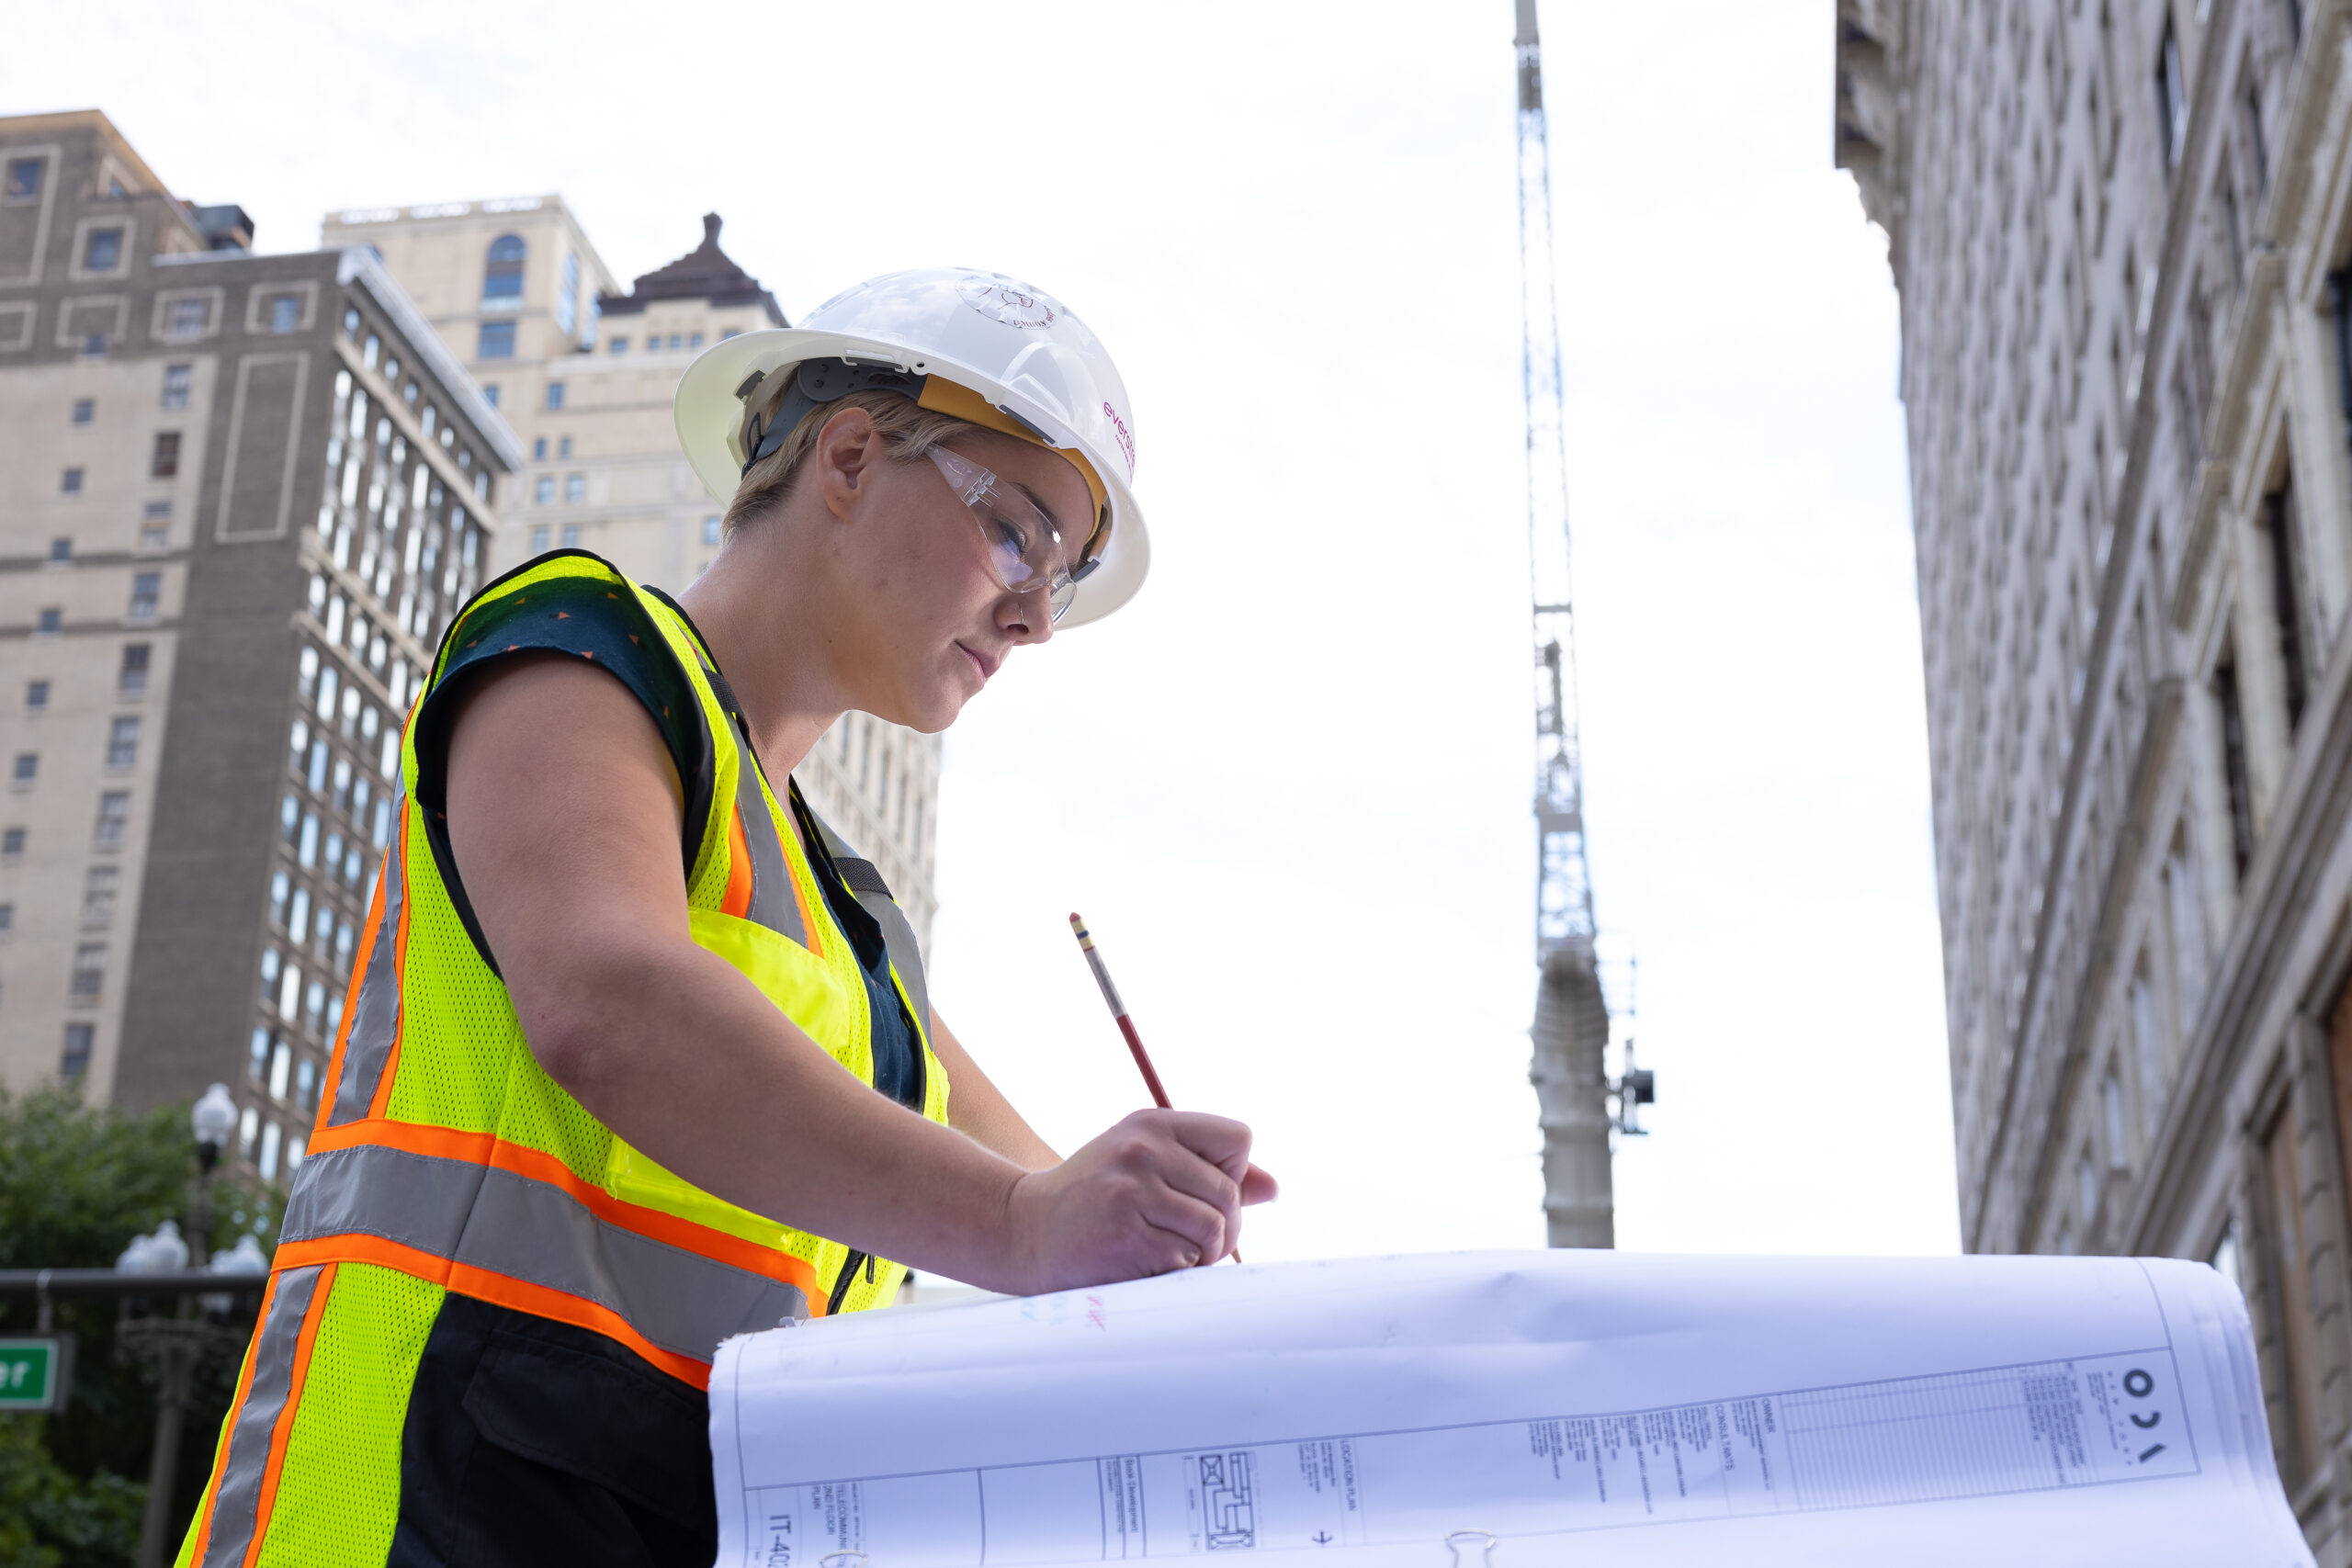 a woman in a safety vest and hat looking at plans